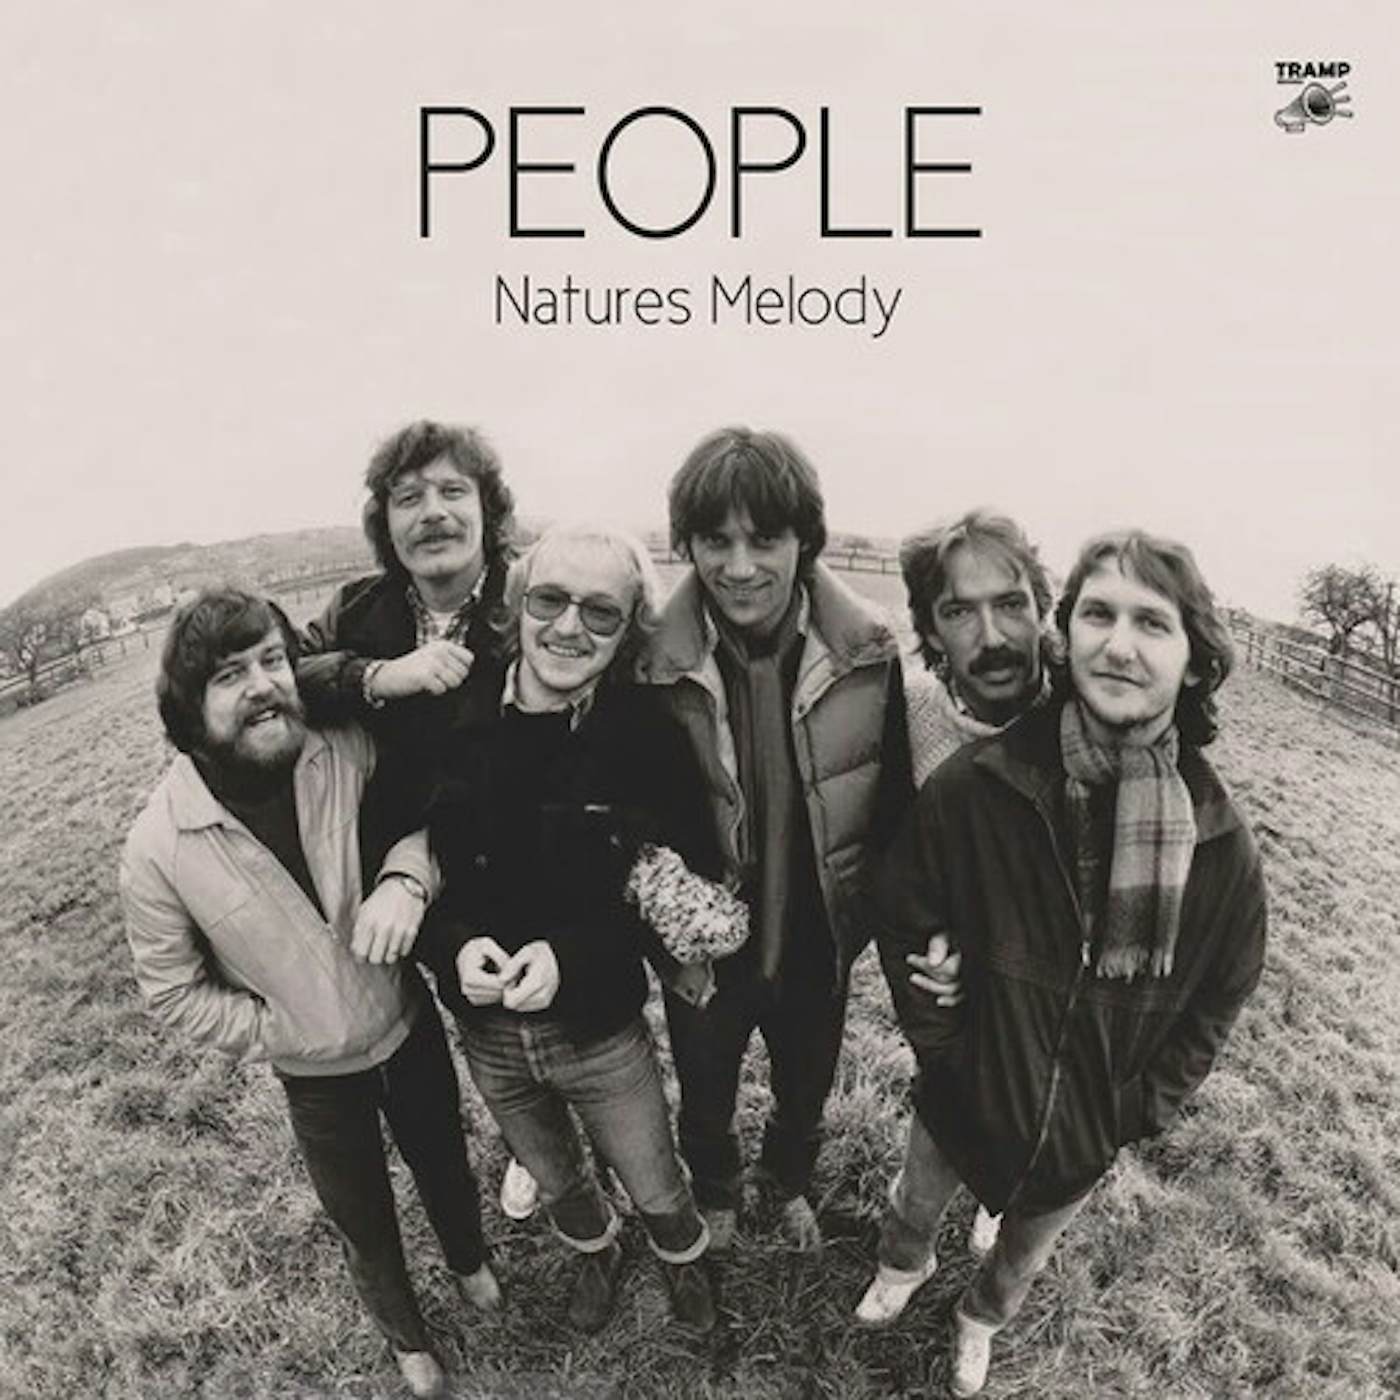 People Nature's Melody Vinyl Record